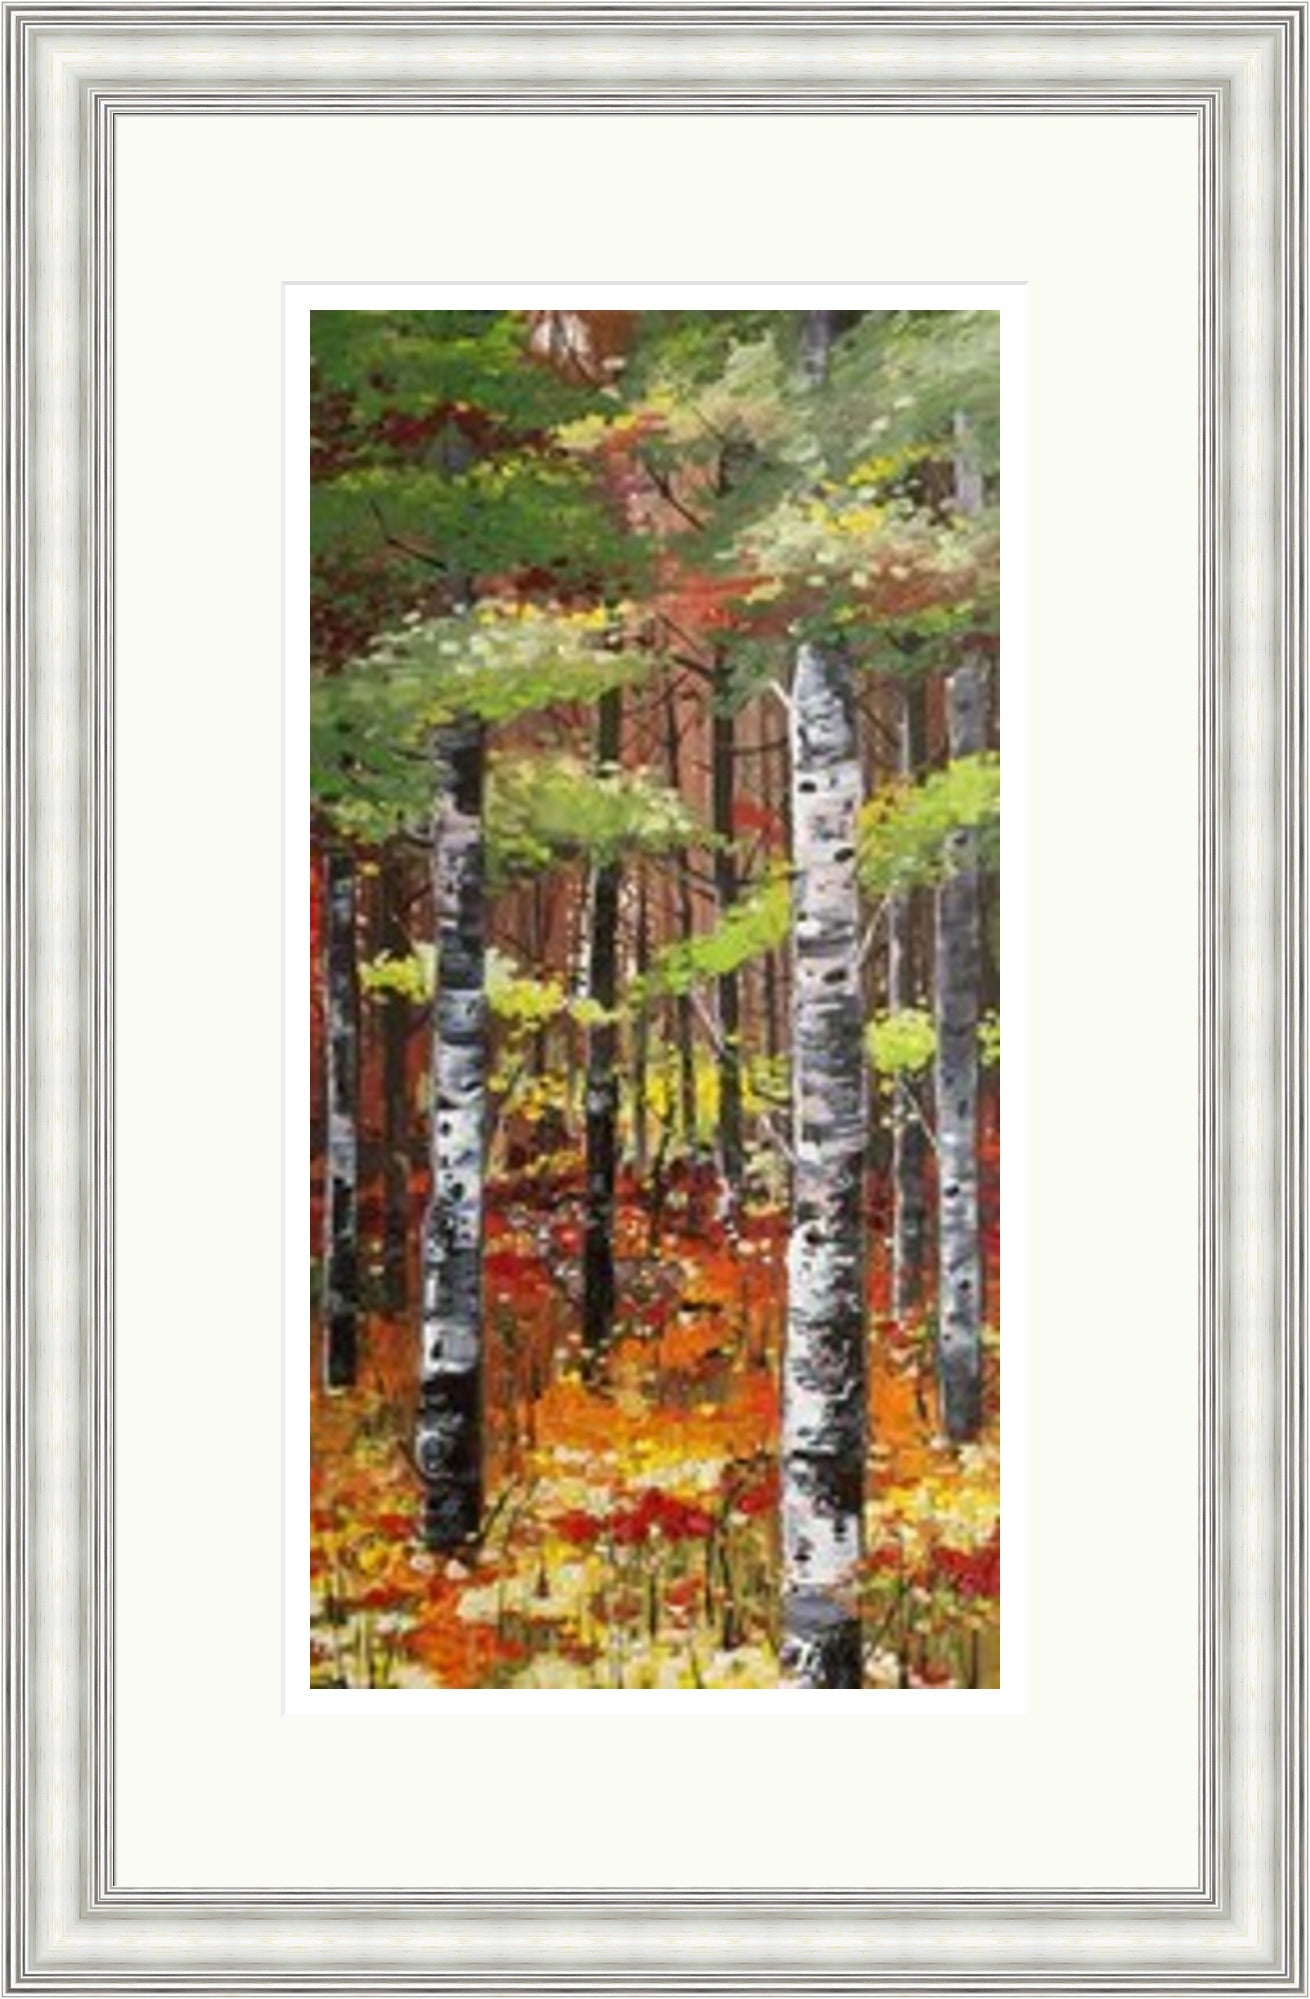 Silver Birches & Poppies by Daniel Campbell